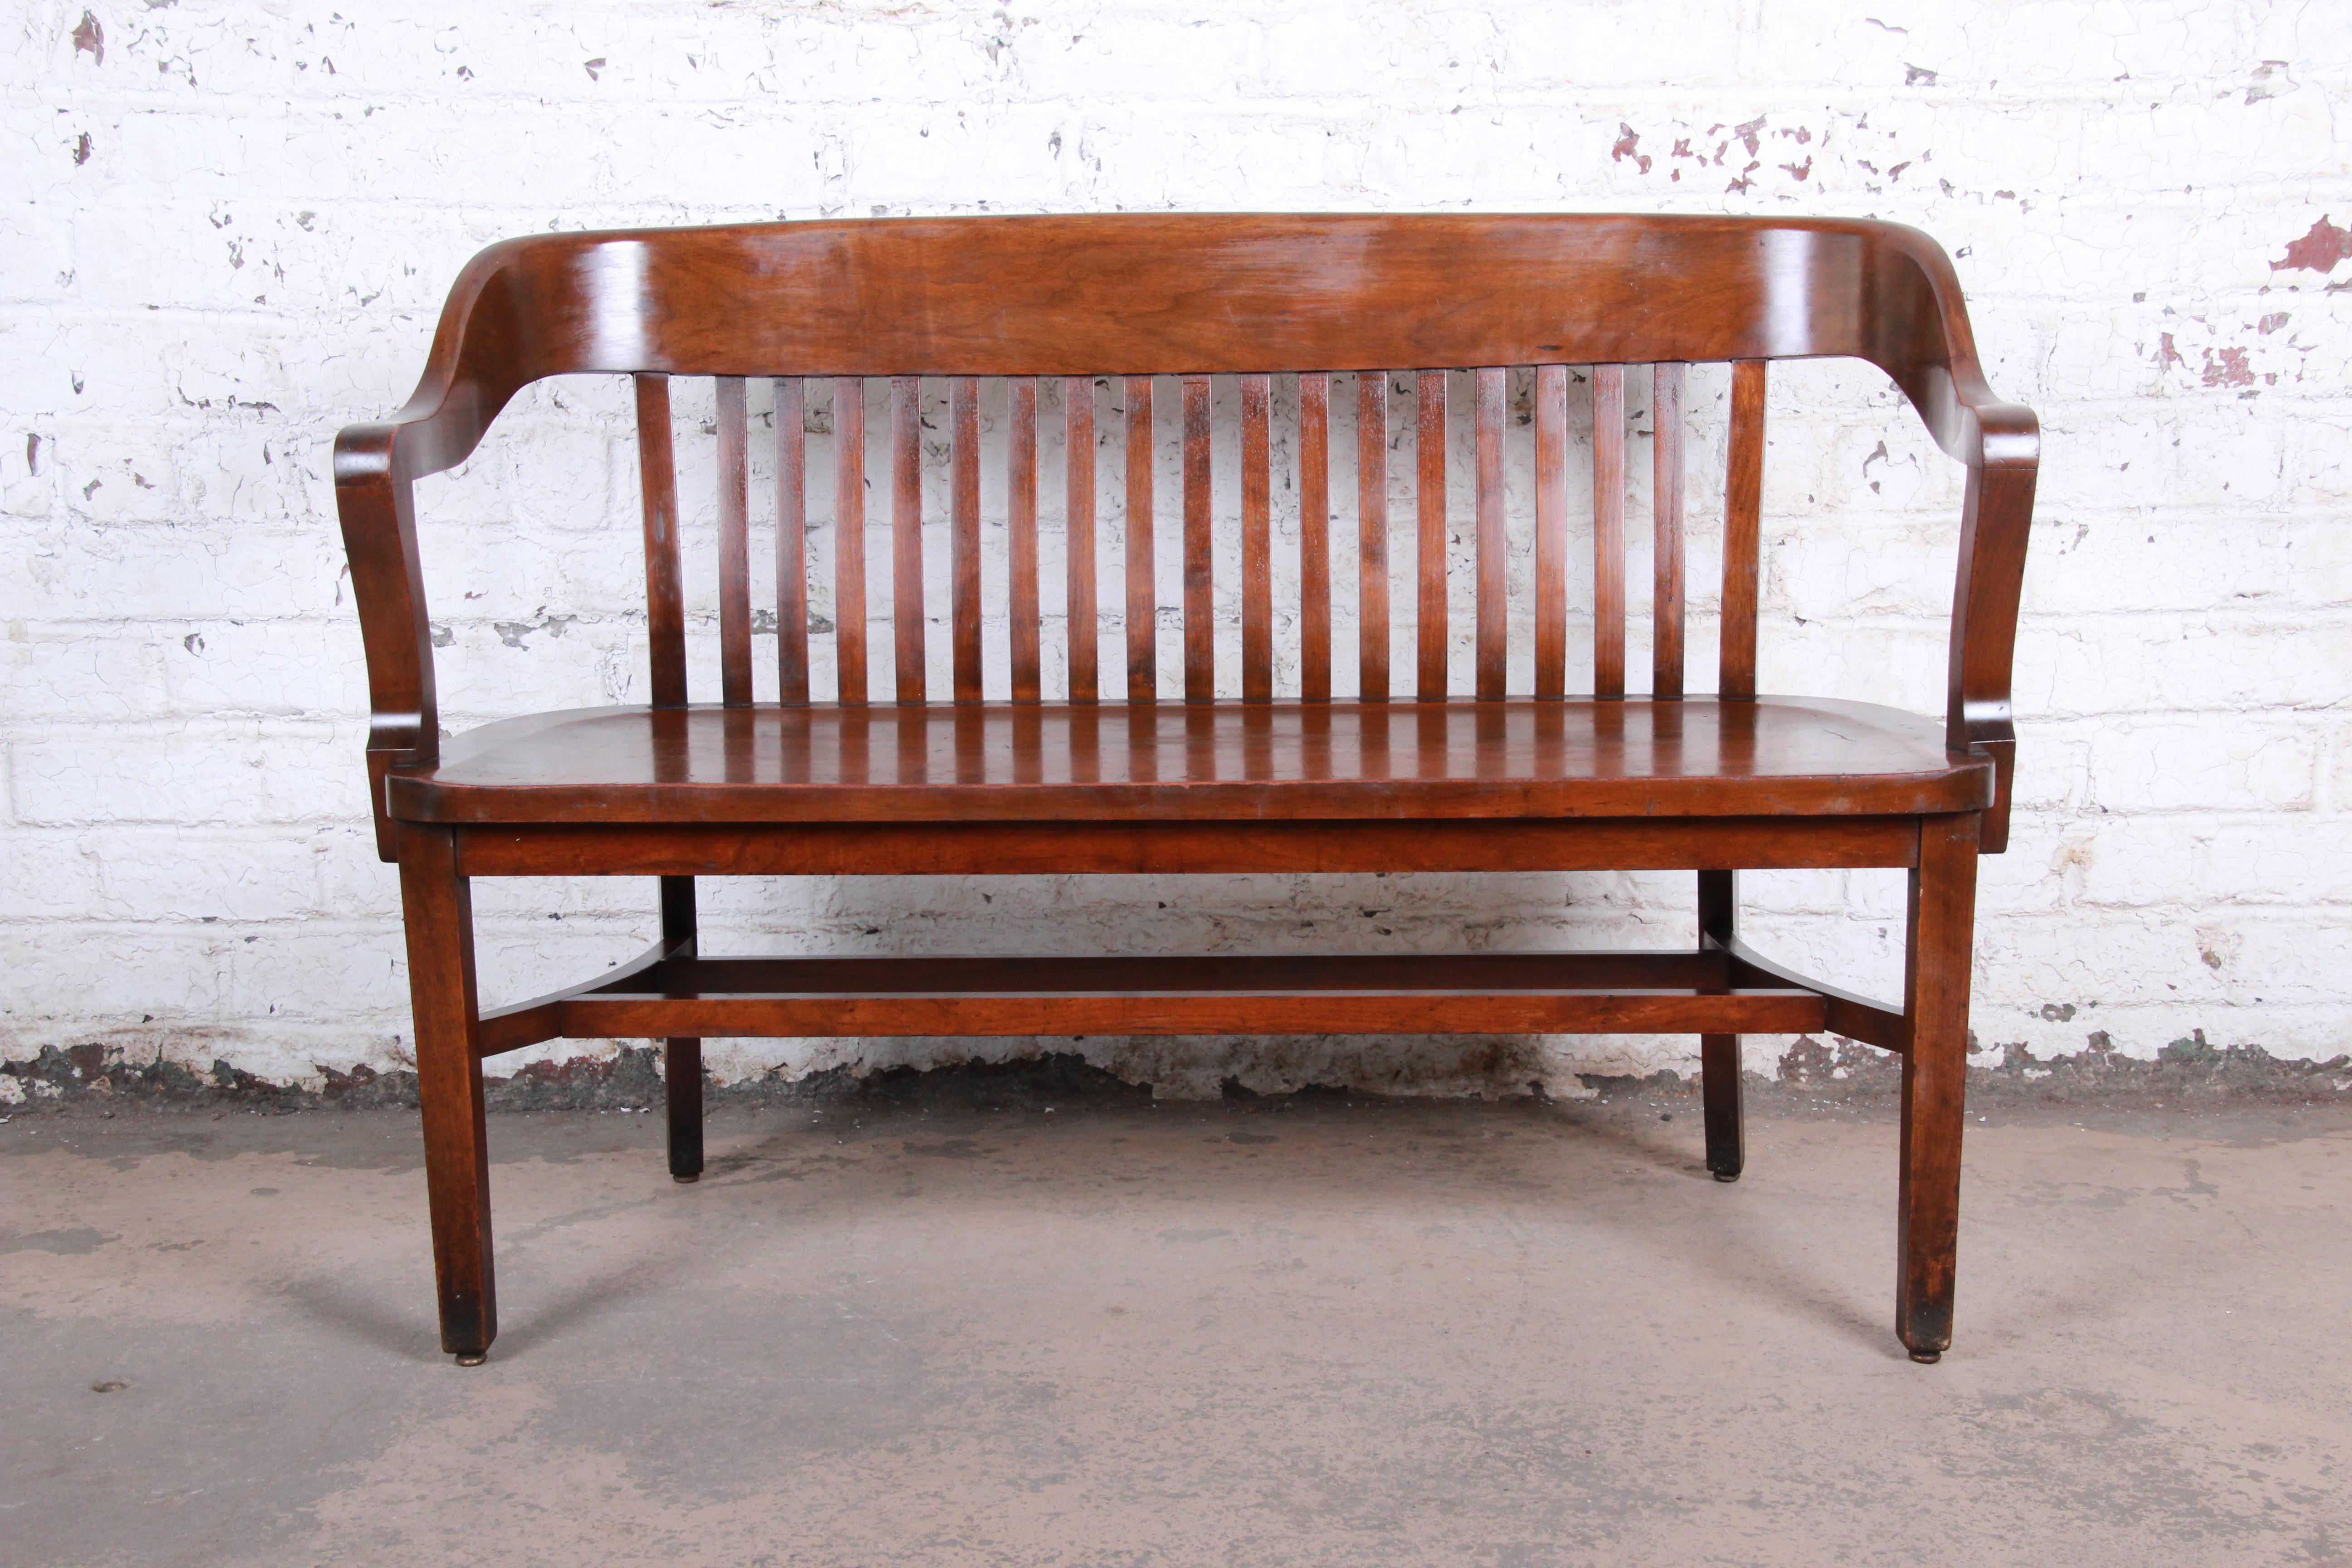 A gorgeous antique lawyer's bench by Heywood-Wakefield. The bench is made from solid walnut and is both sturdy and comfortable. A beautiful statement piece for an entryway or office. The original Heywood-Wakefield tag is present on the bottom of the